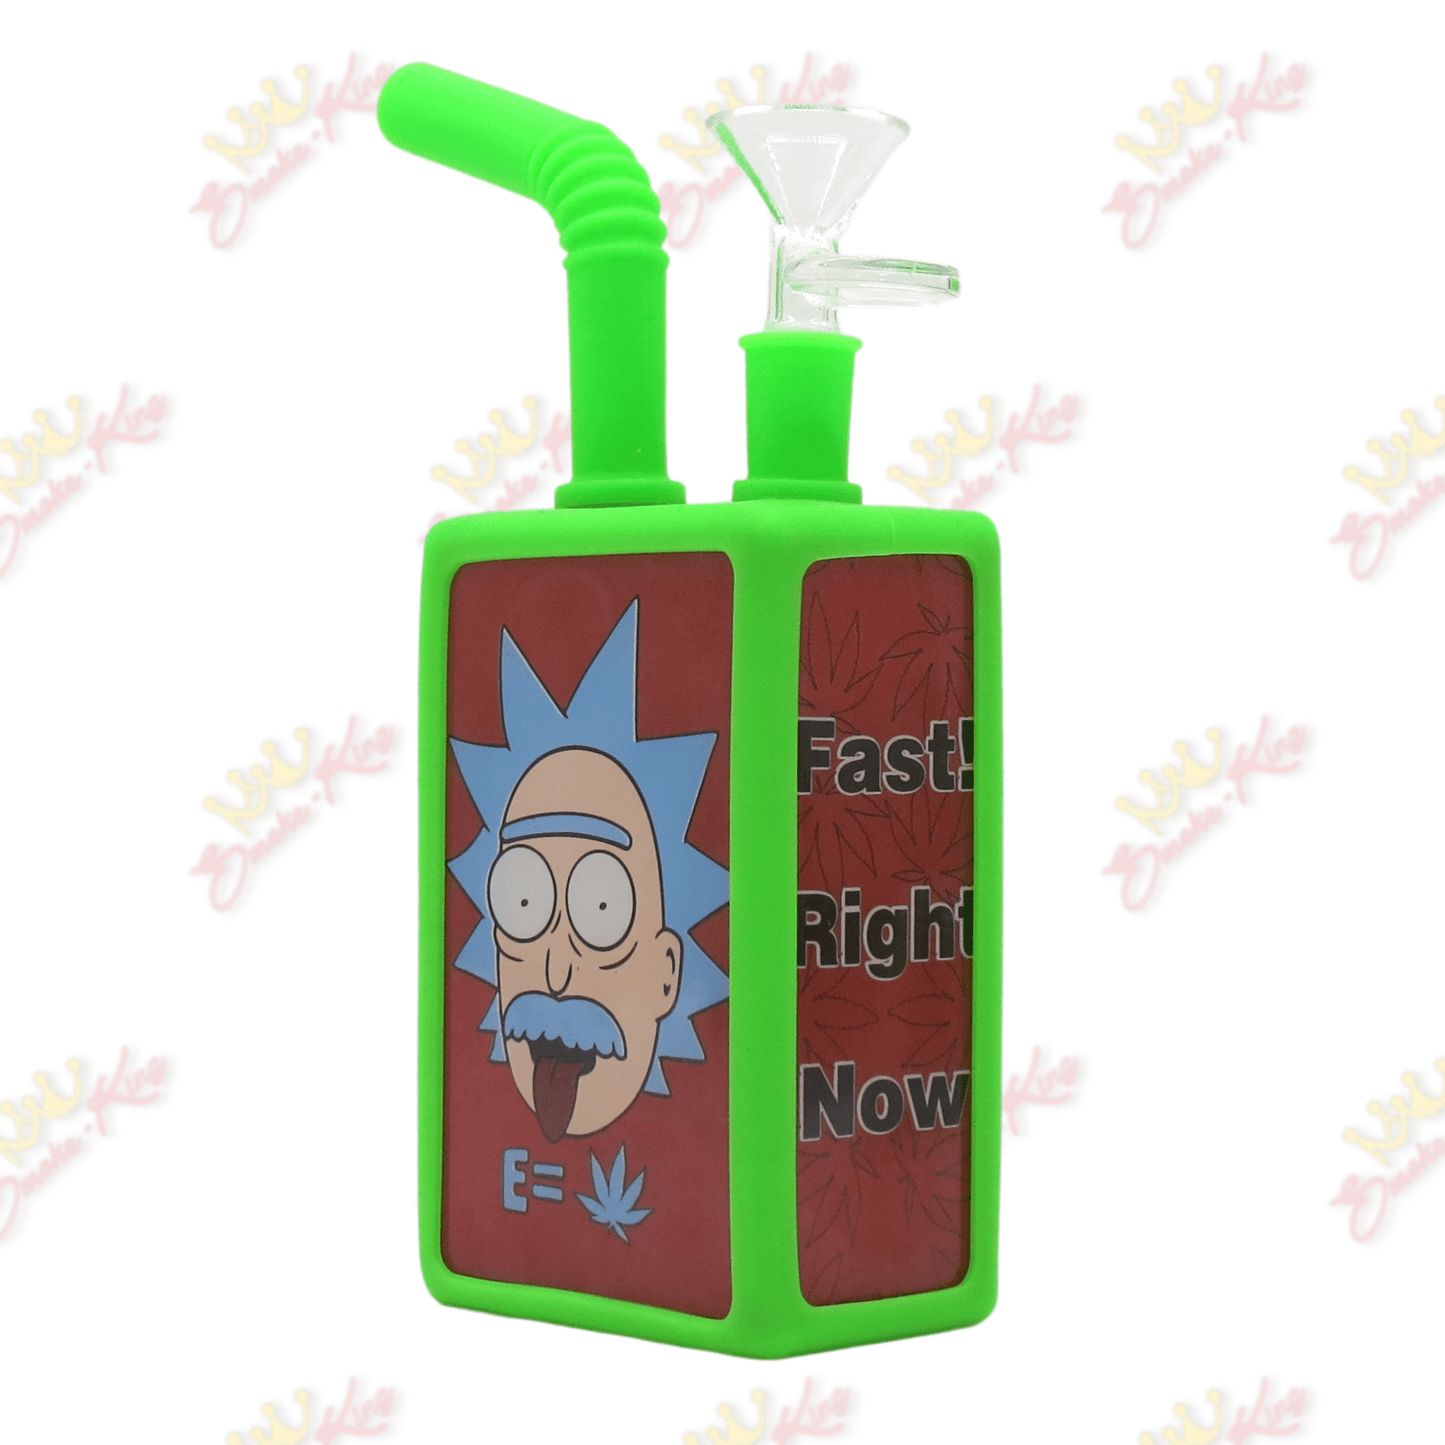 Rick and Morty Juice Box Bong w/ Silicone Straw